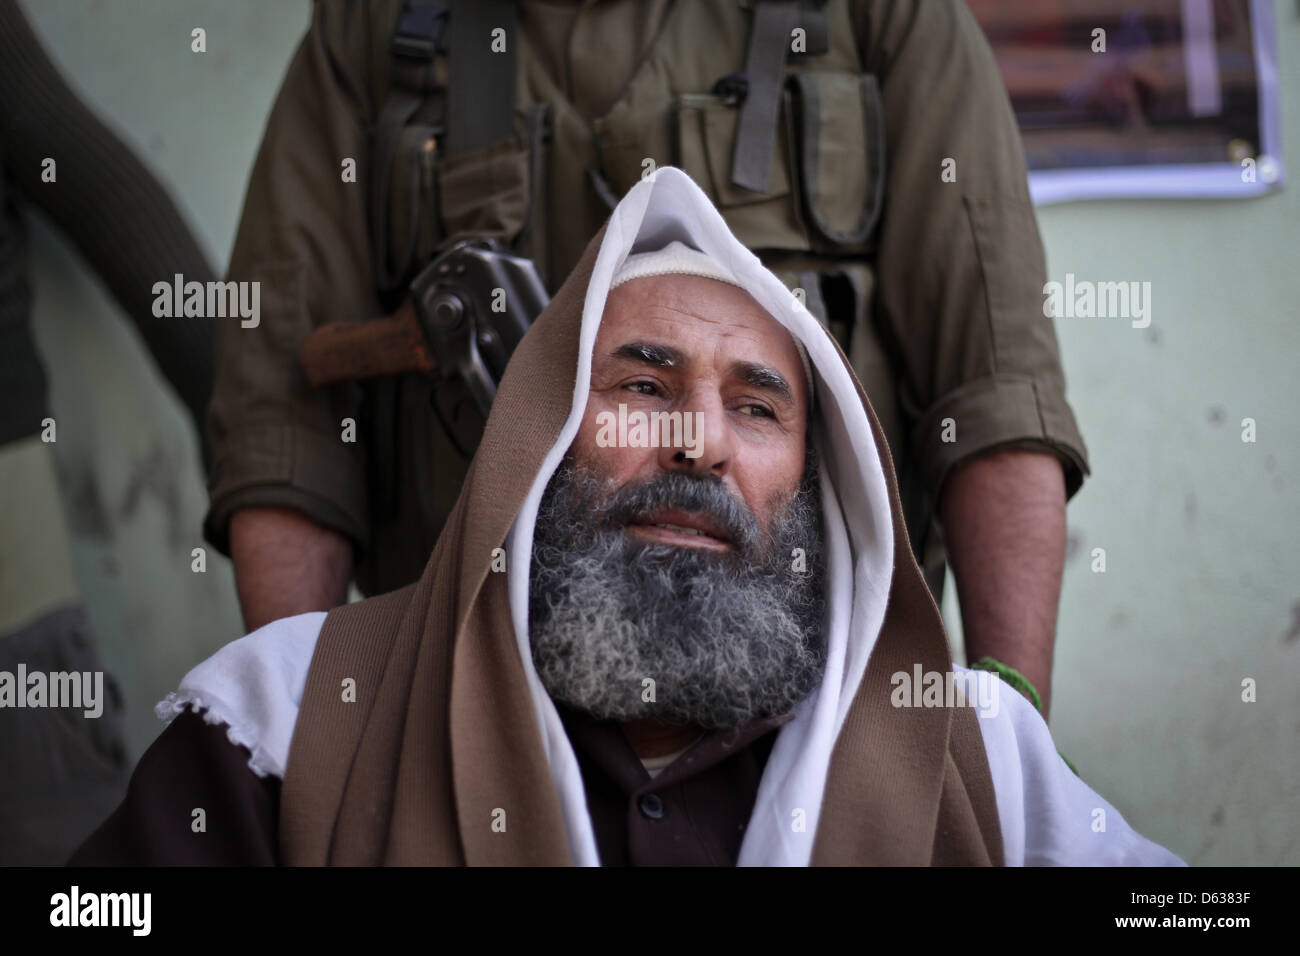 Gaza strip, Gaza City. 11th April 2013. A Palestinian man dressed as late Hamas leader sheikh Ahmed Yassin inside a prison in Gaza City that had been used by Israeli security services to keep Palestinian prisoners during Israel's occupation of Gaza Strip. Credit: Ahmed Deeb / Alamy Live News Stock Photo